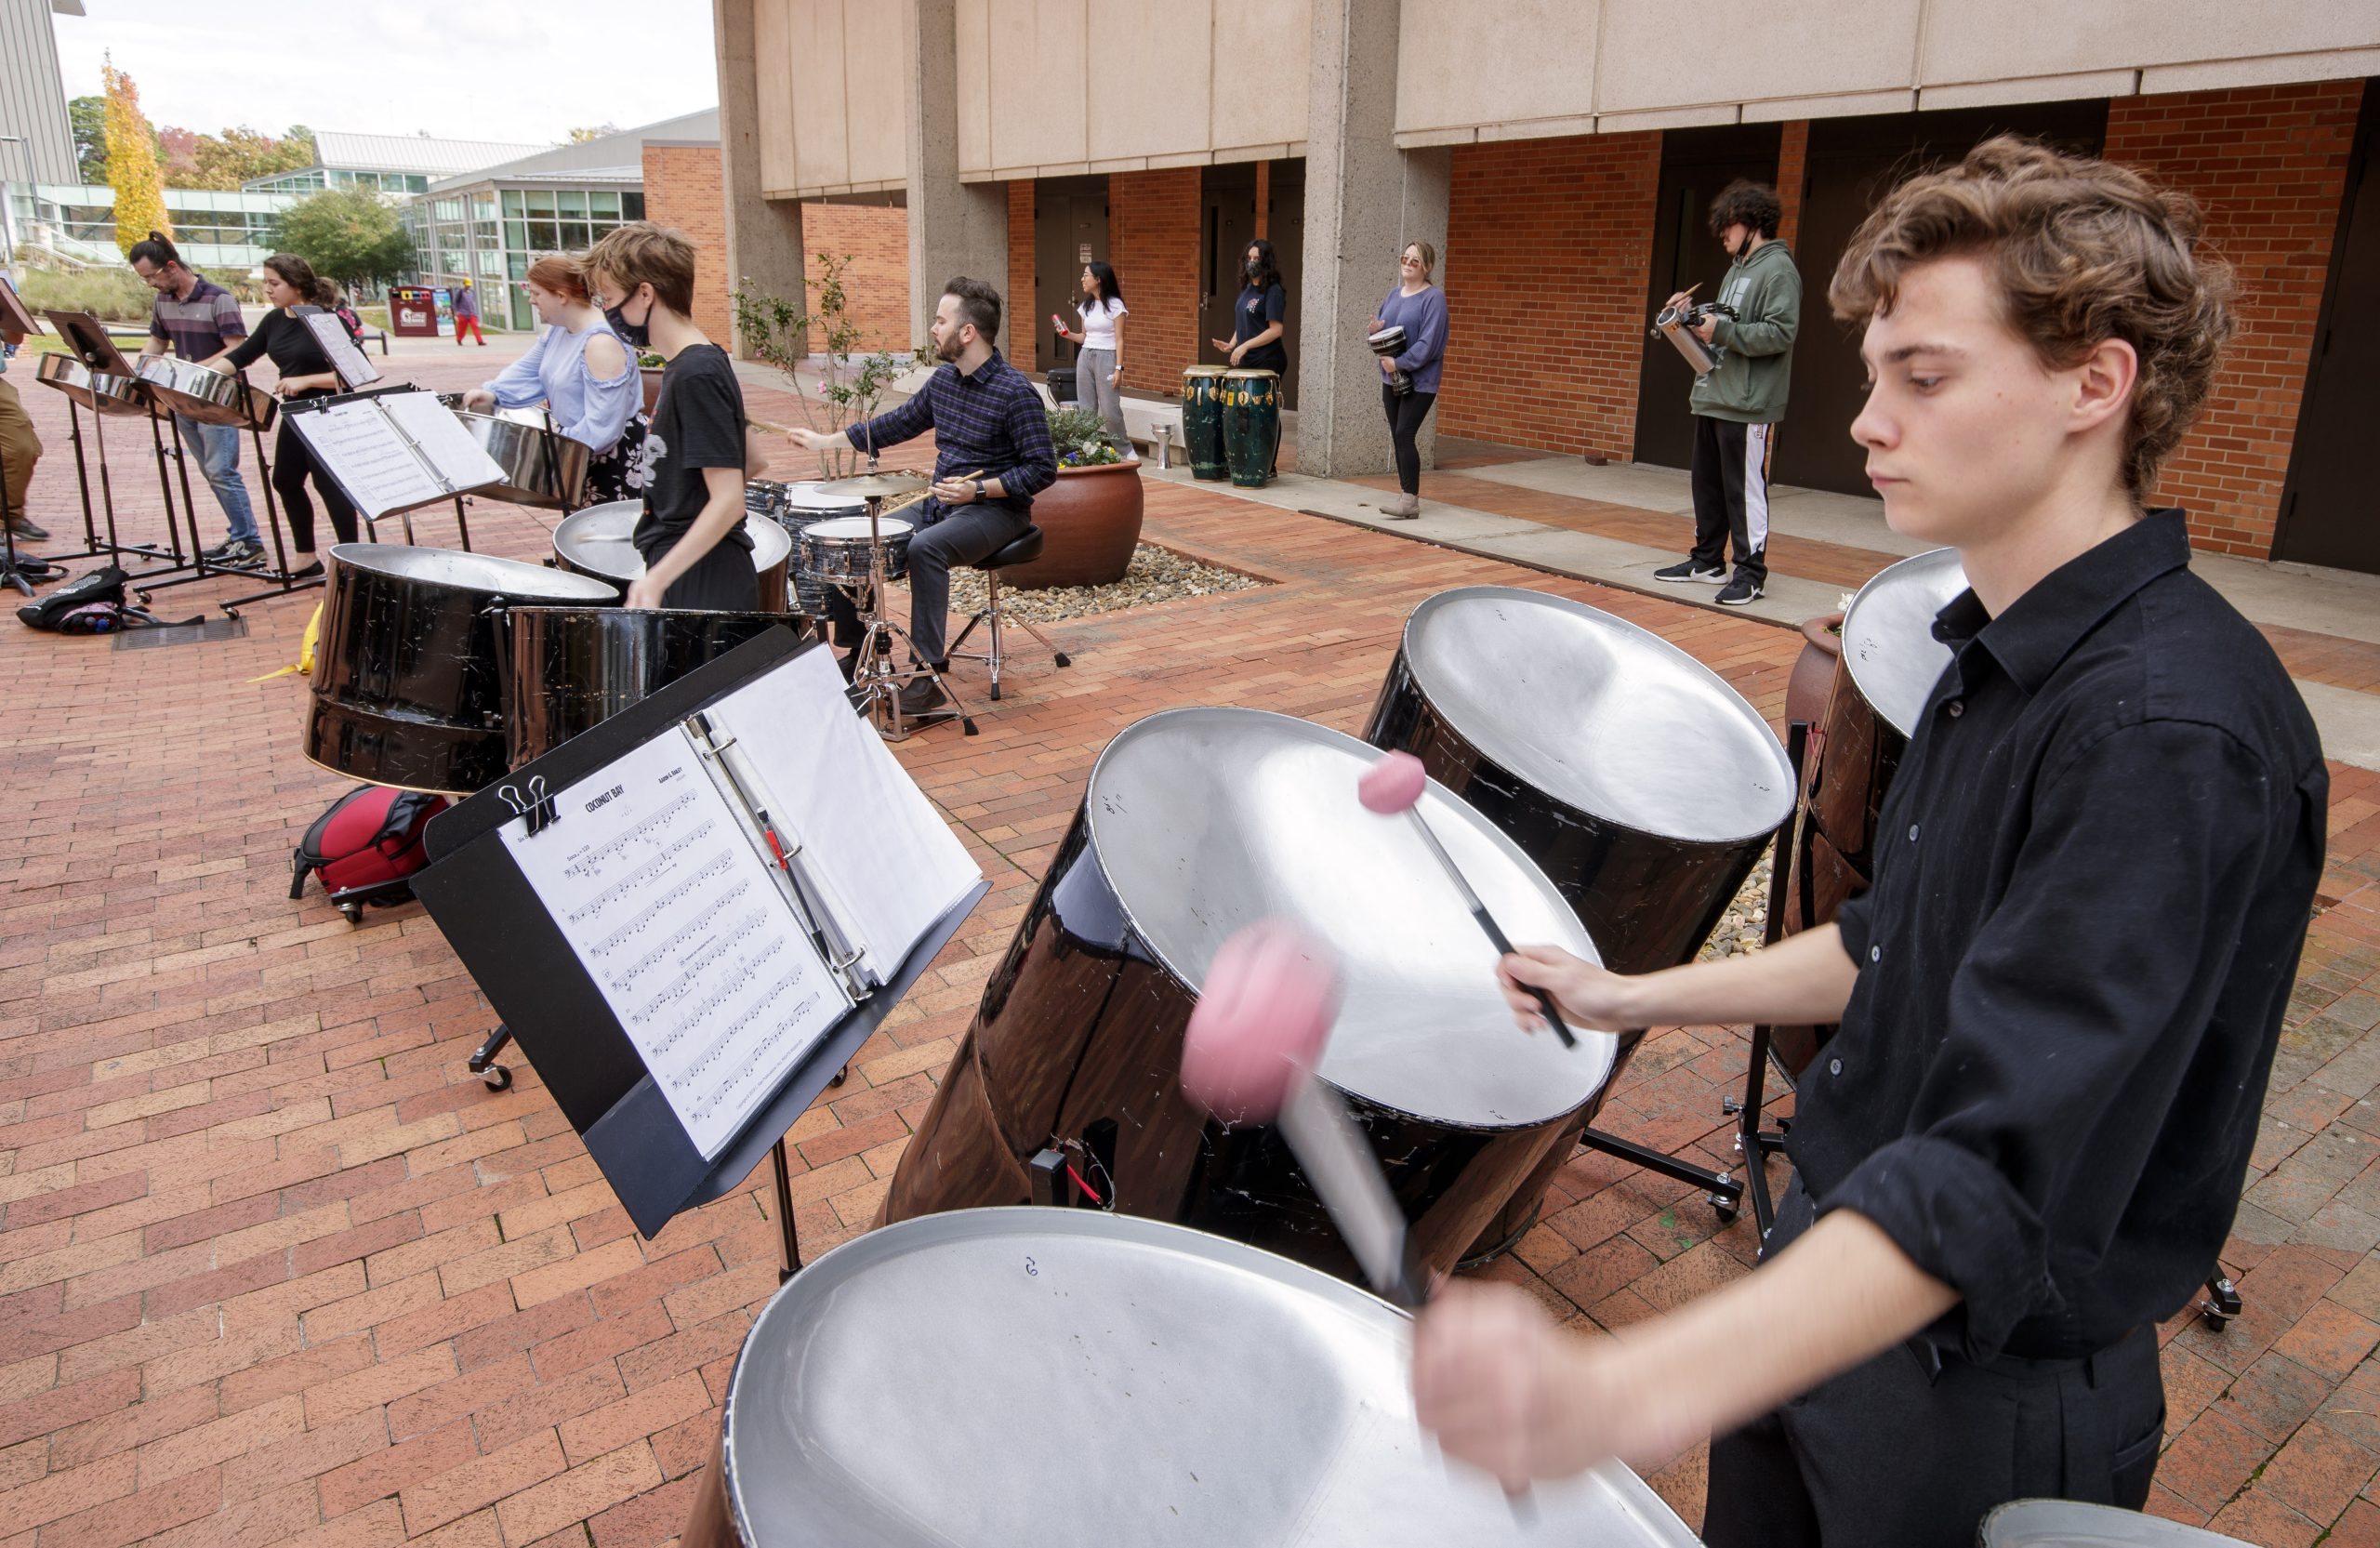 Six members of UA Little Rock's Trojan Steel Band playing instruments outdoors on campus.